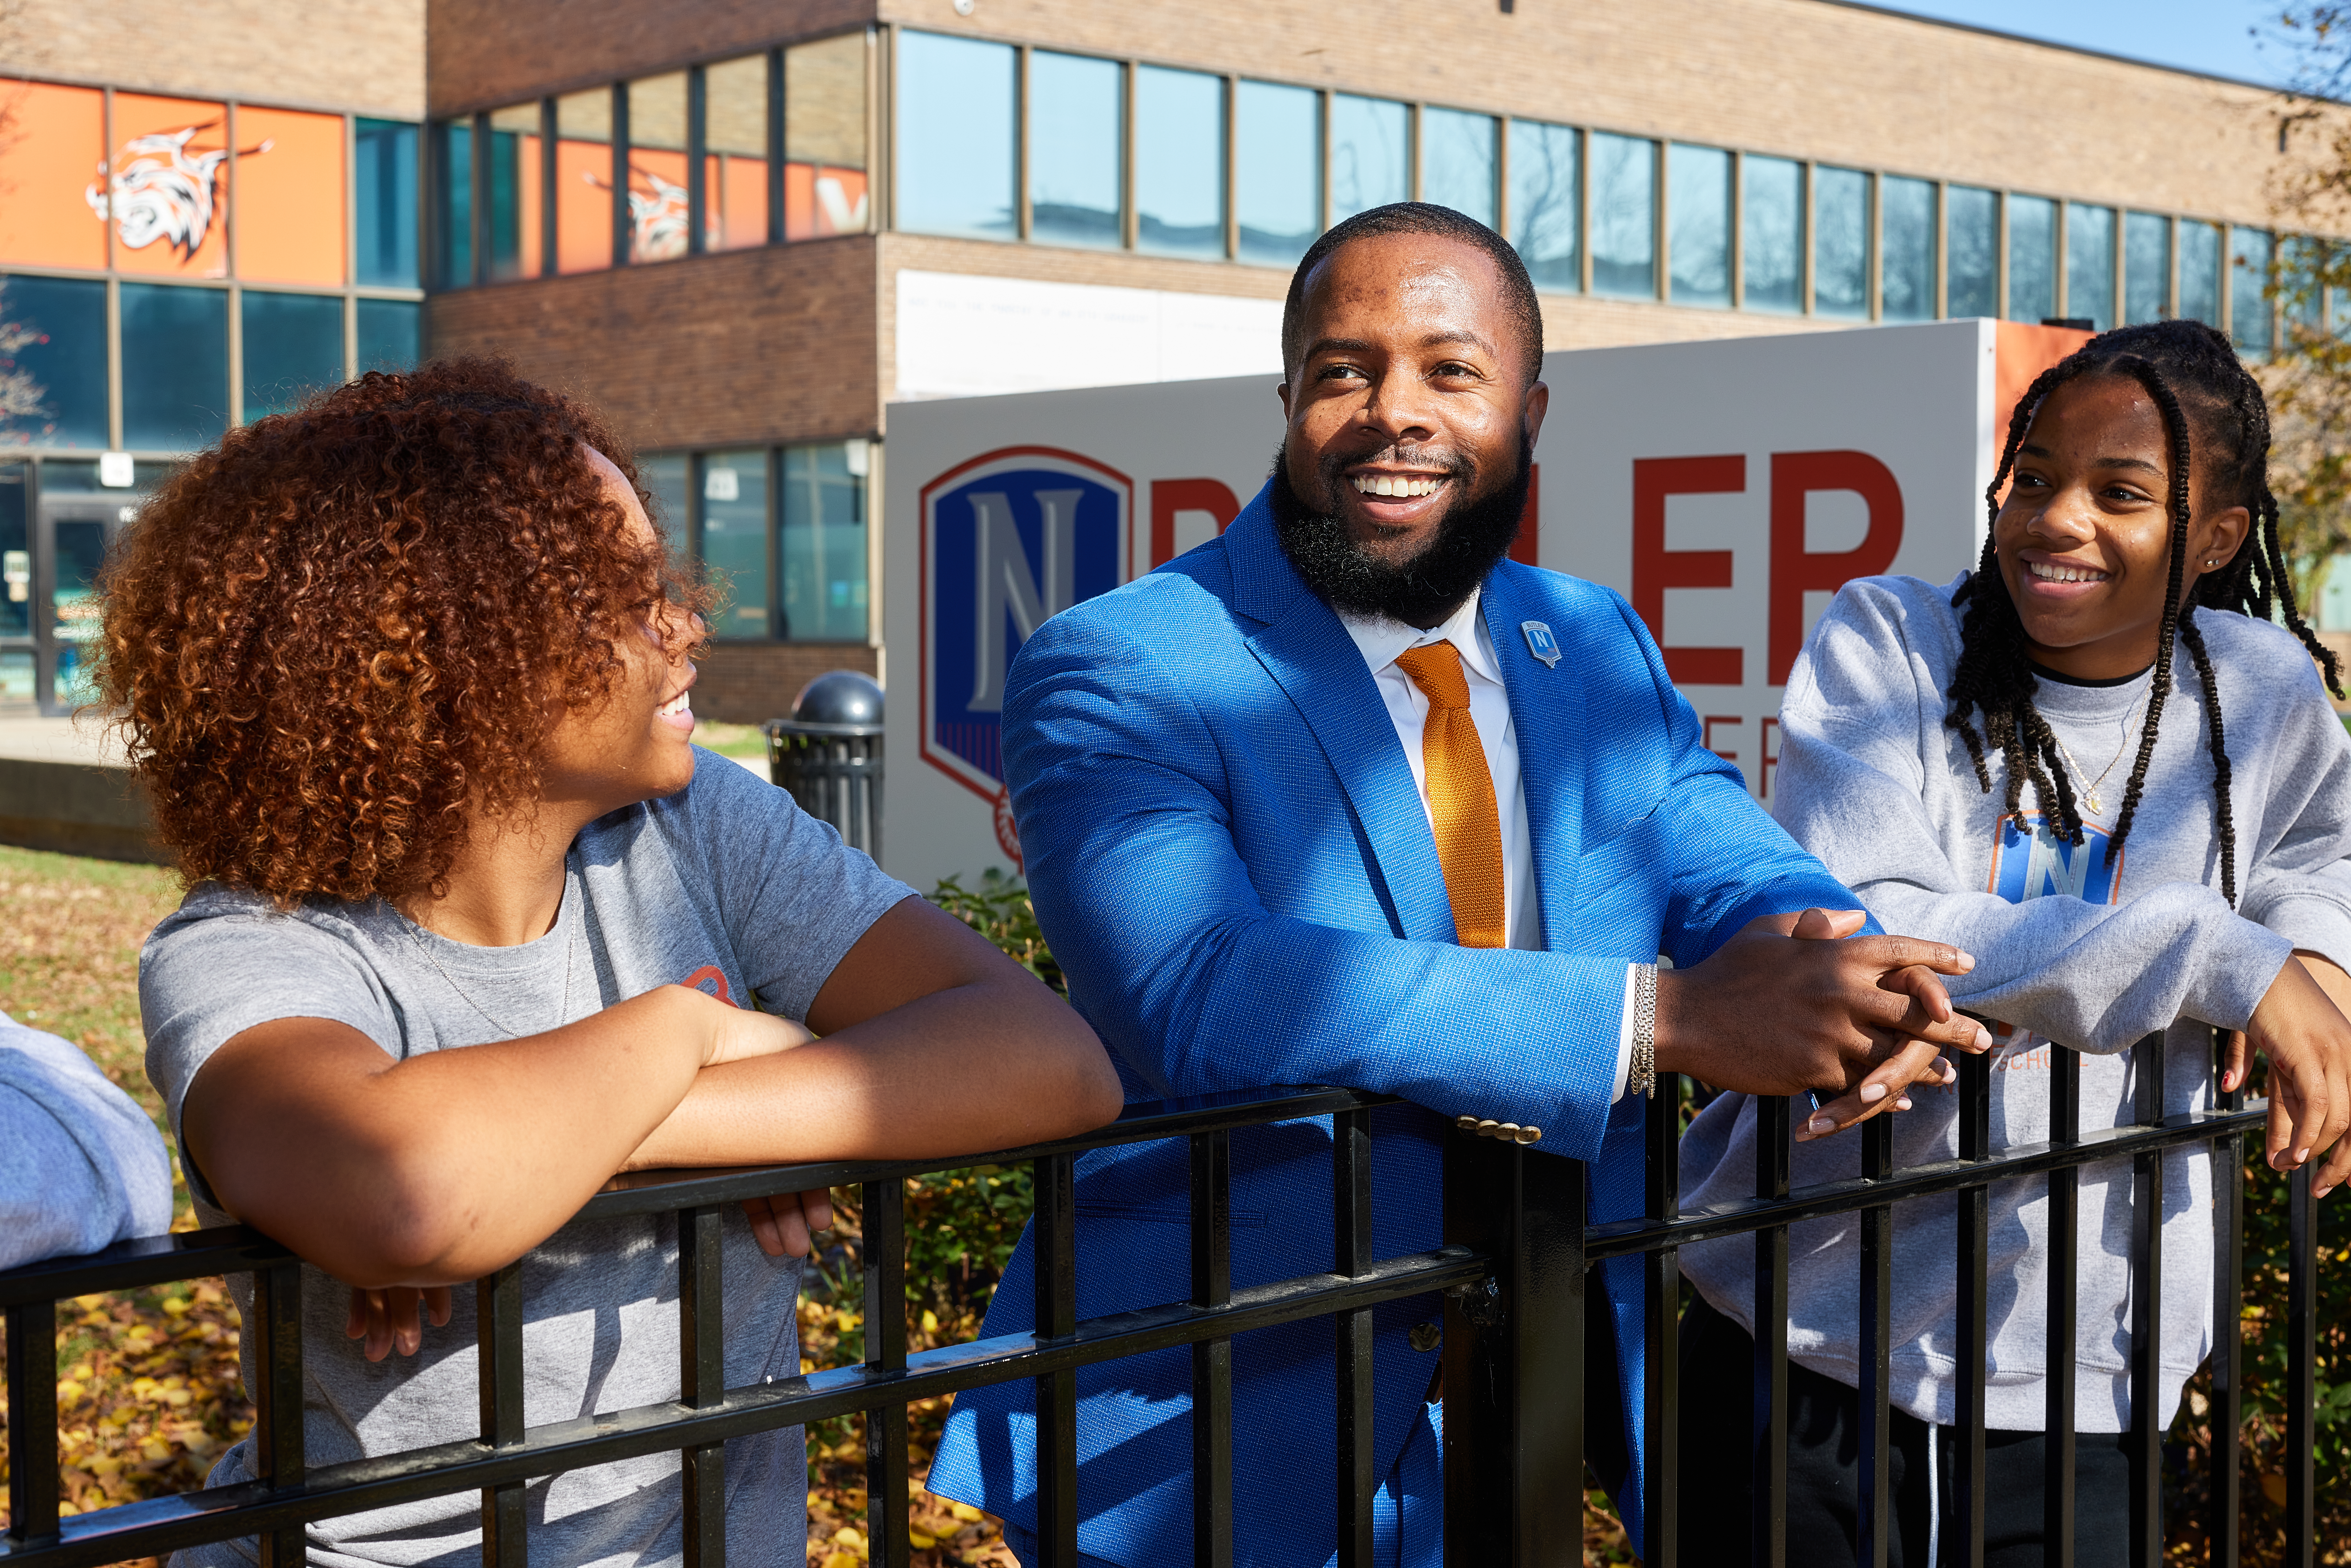 Photo shows Principal Brian Riddick talking with two Butler College Prep students outside the school building. They are all smiling and looking at him, like they are having an engaging conversation.